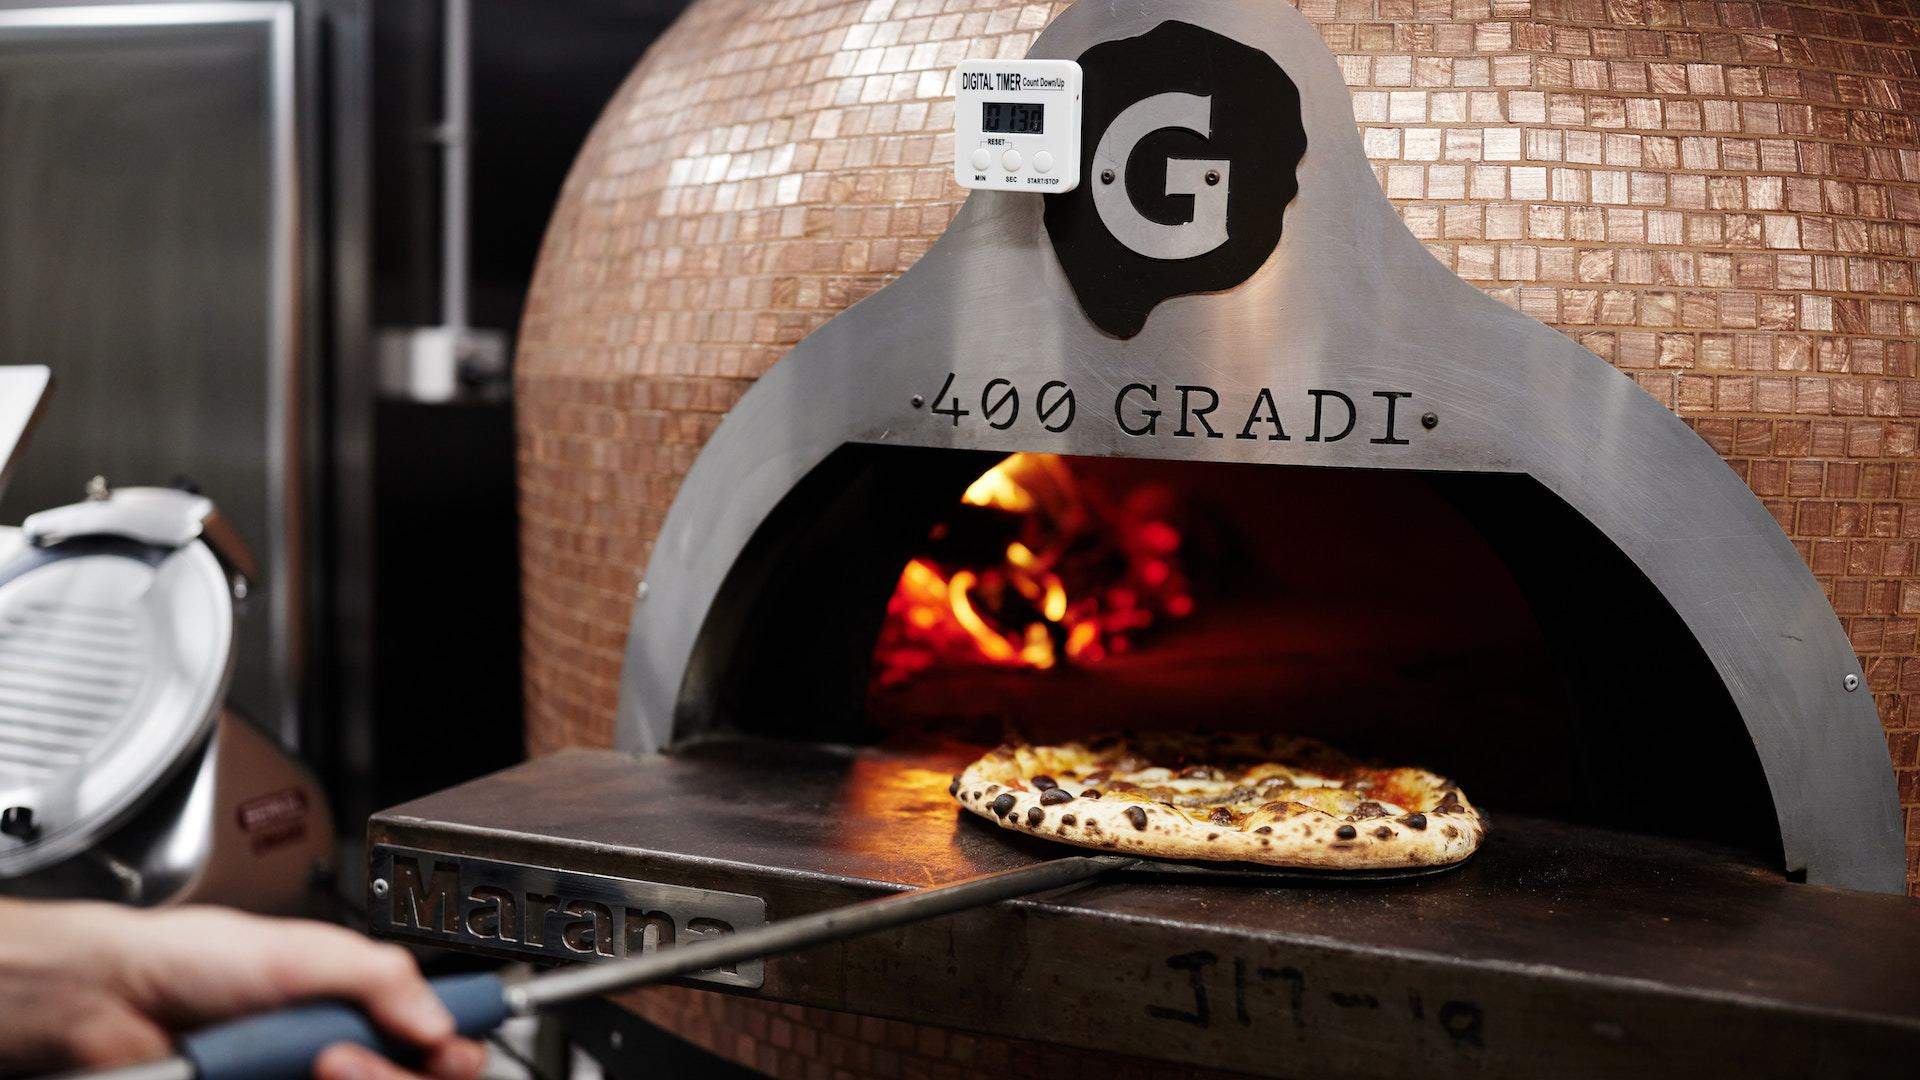 The Newest 400 Gradi Has Rolled Into Mornington With a Restaurant, Bar, Gelateria and Delicatessen